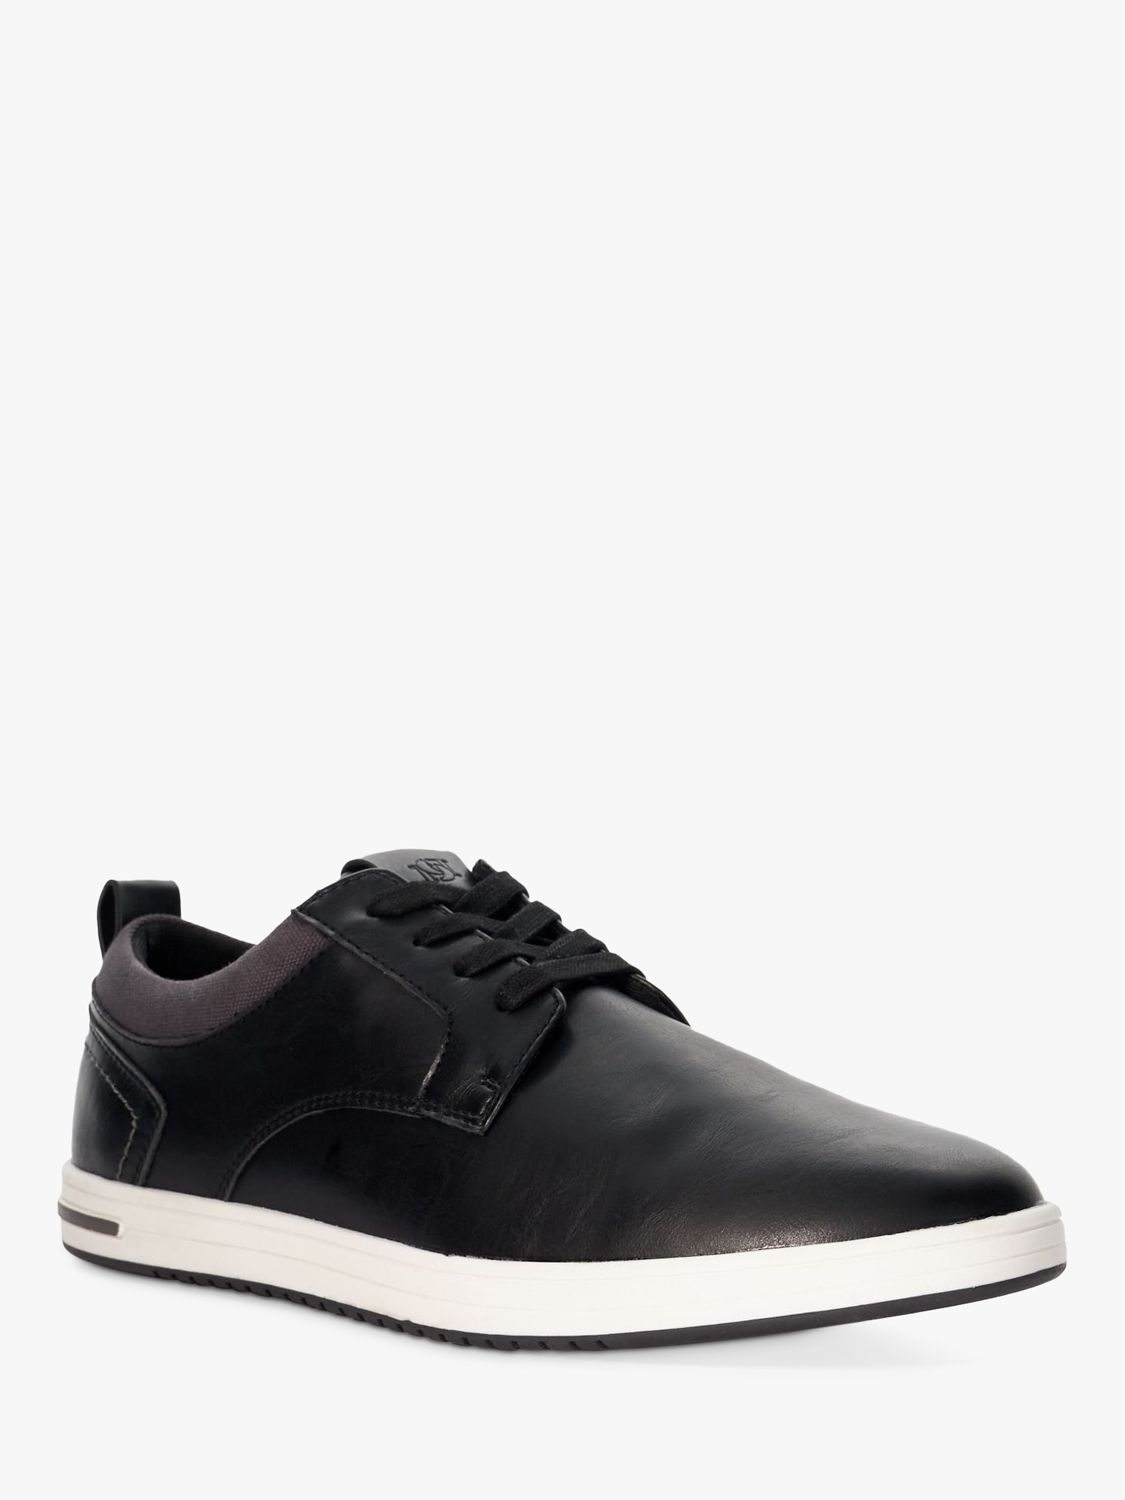 Buy Dune Travels Lace Up Trainers, Black Online at johnlewis.com